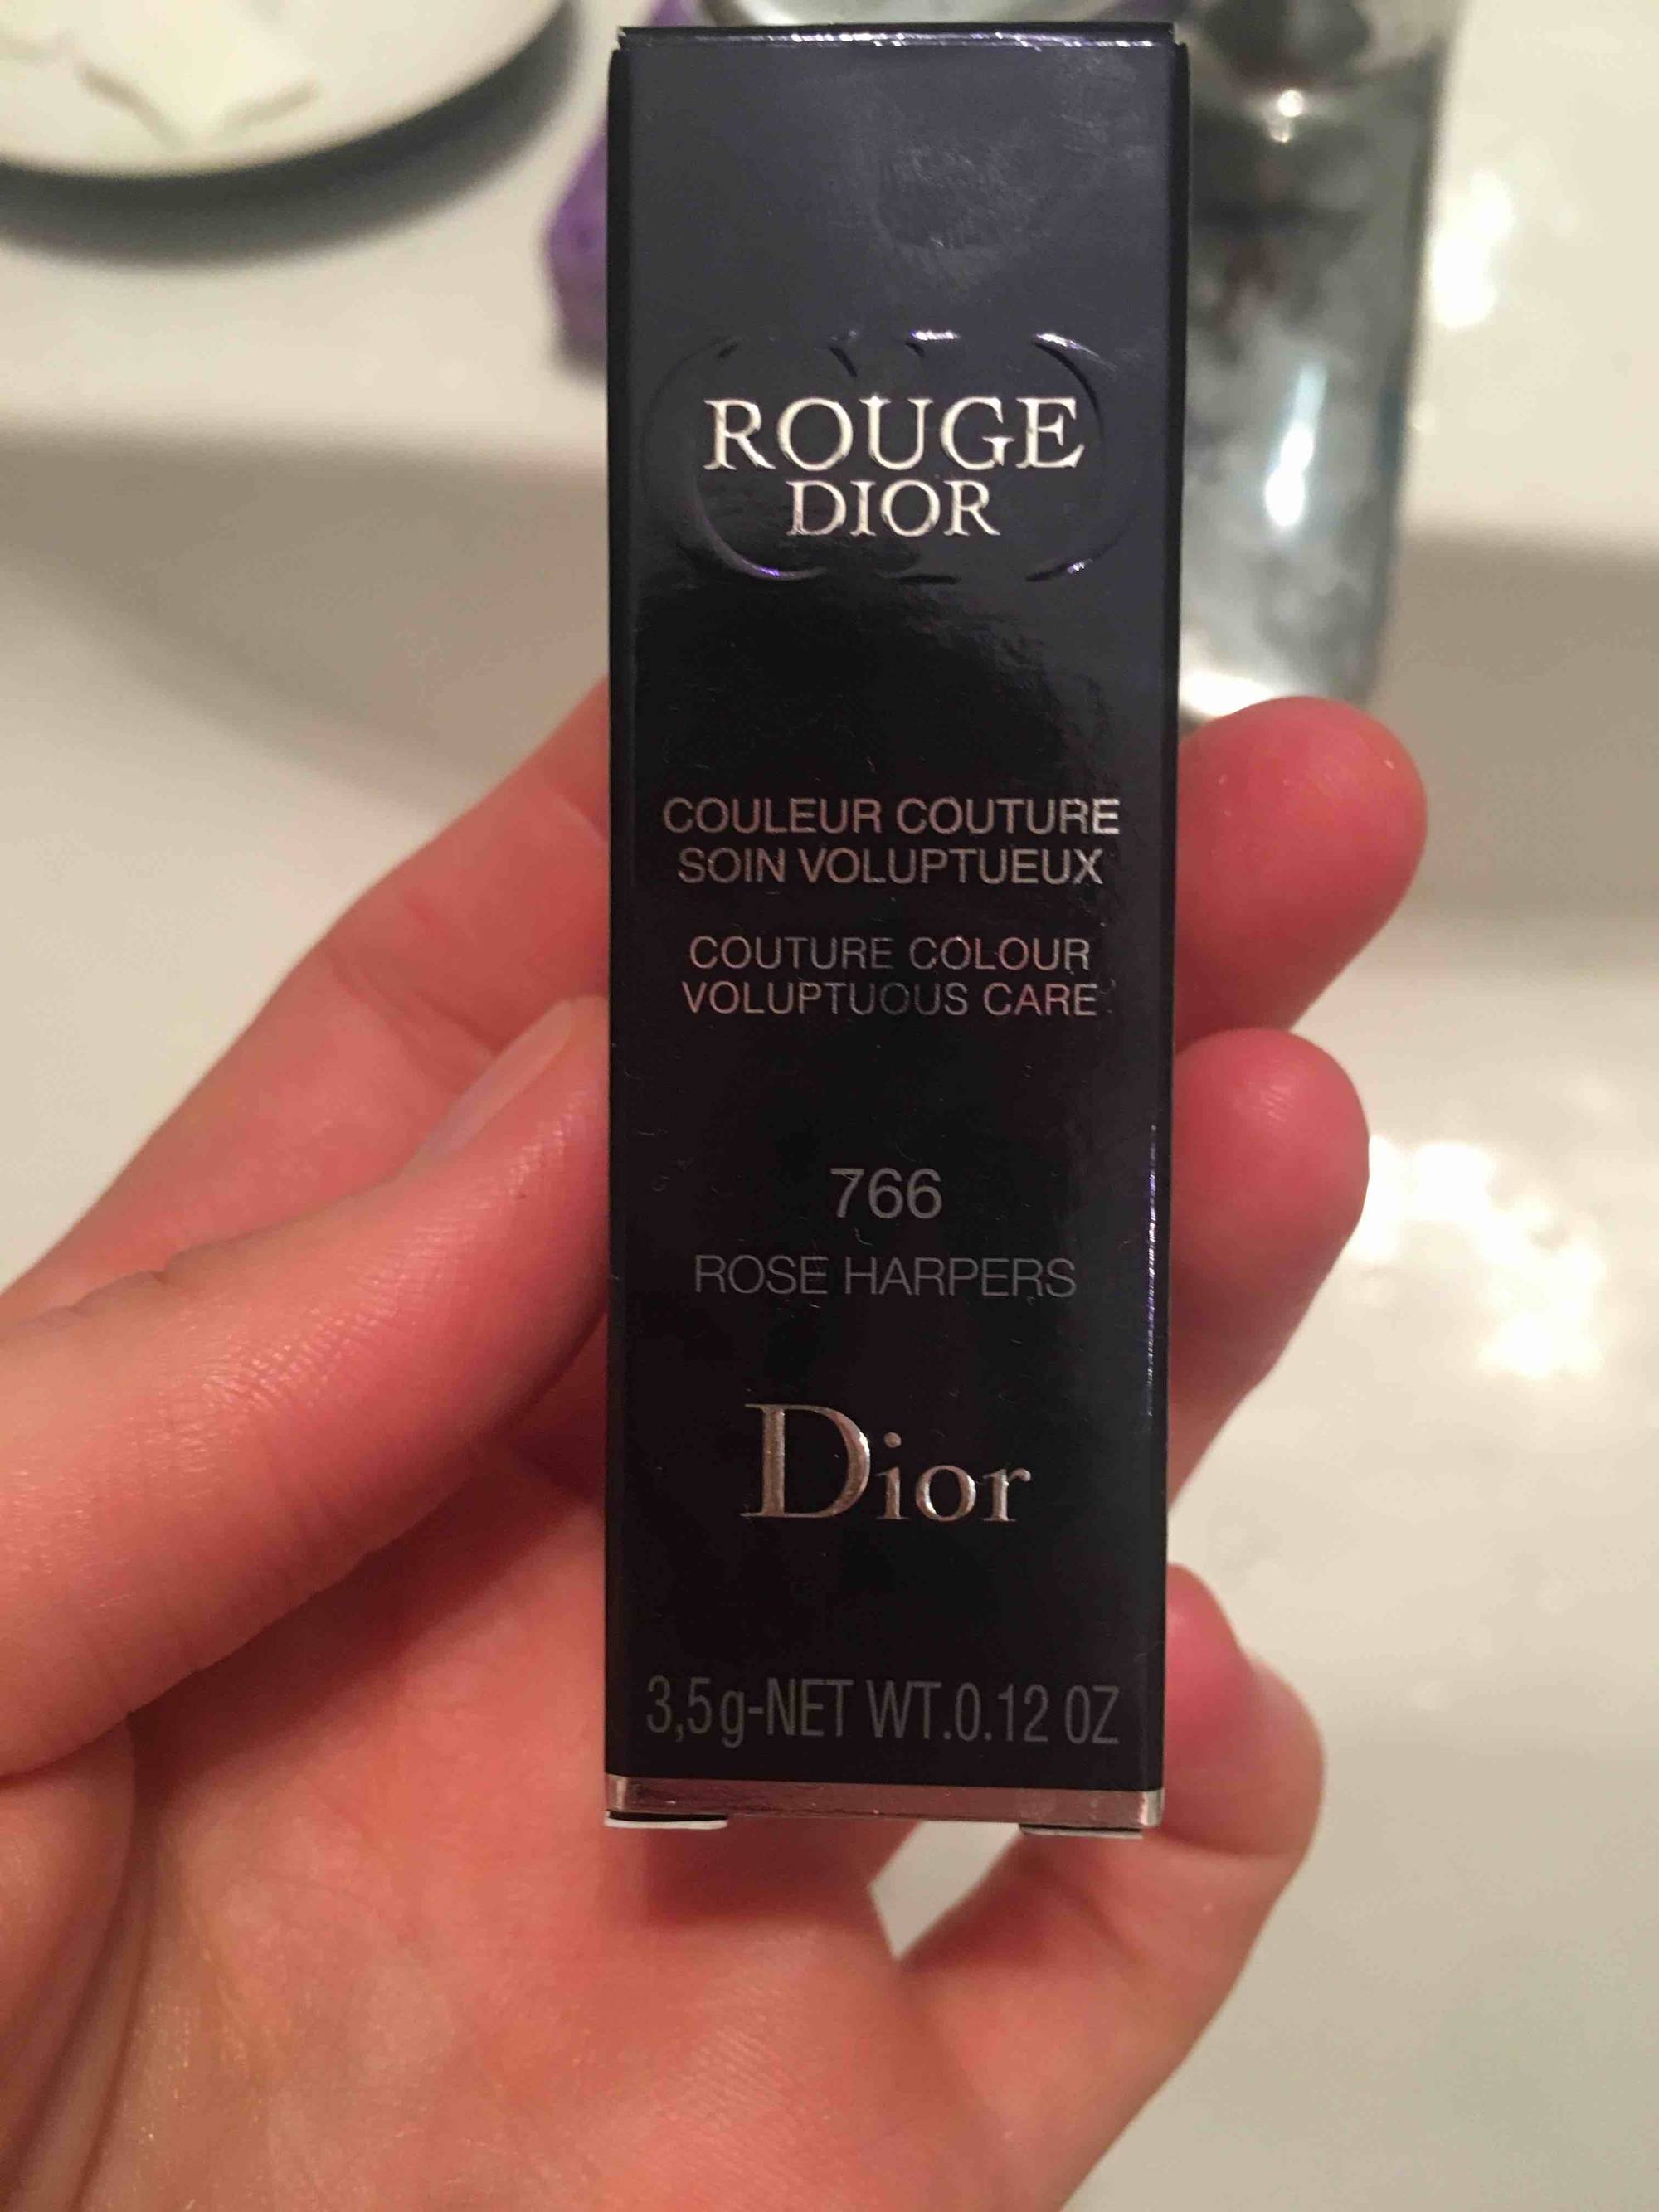 DIOR - Rouge dior - Couleur couture soin voluptueux 766 Rose harpers